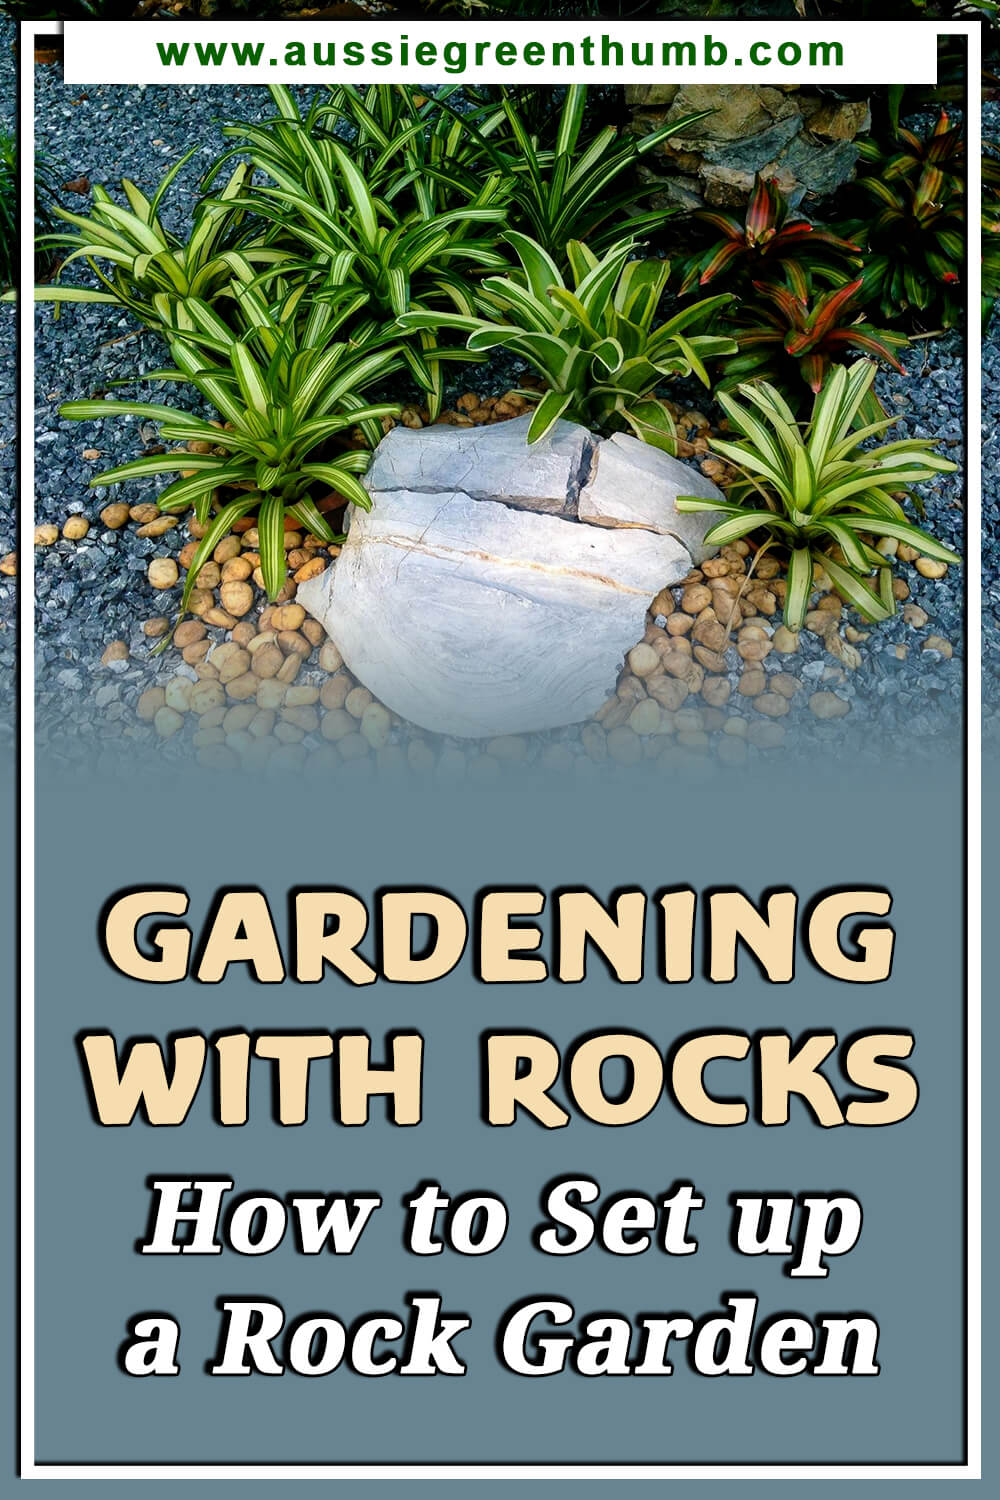 Gardening with Rocks – How to Set up a Rock Garden